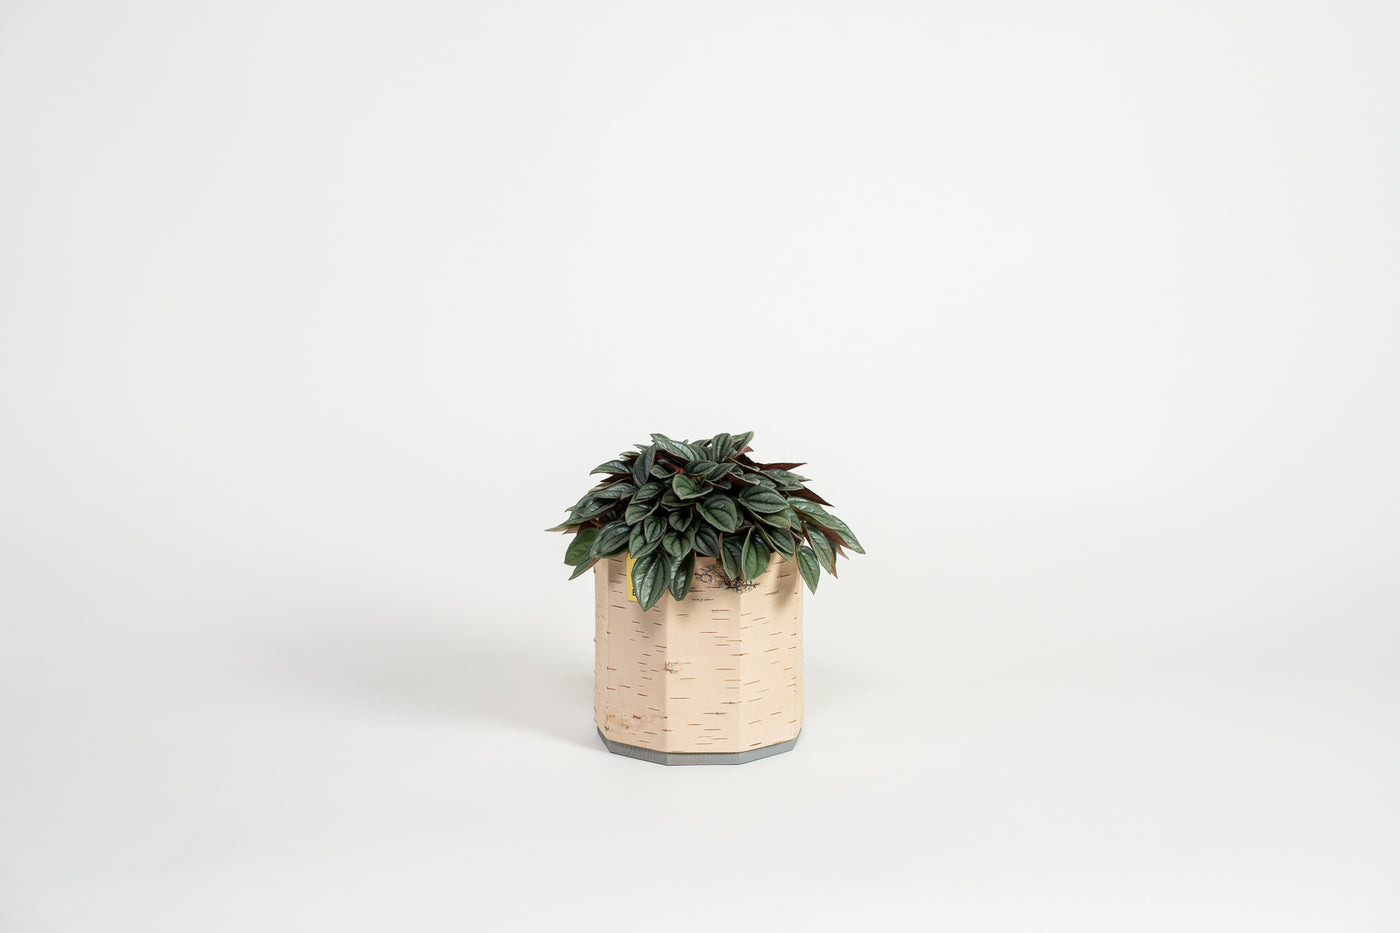 Tara Kesk Birch Bark Planters-Home Flora-BIRCH BARK, BOXES / ORGANISERS / CONTAINERS, TERRARIUMS / VASES / PLANT HANGERS-Forest Homes-Nature inspired decor-Nature decor